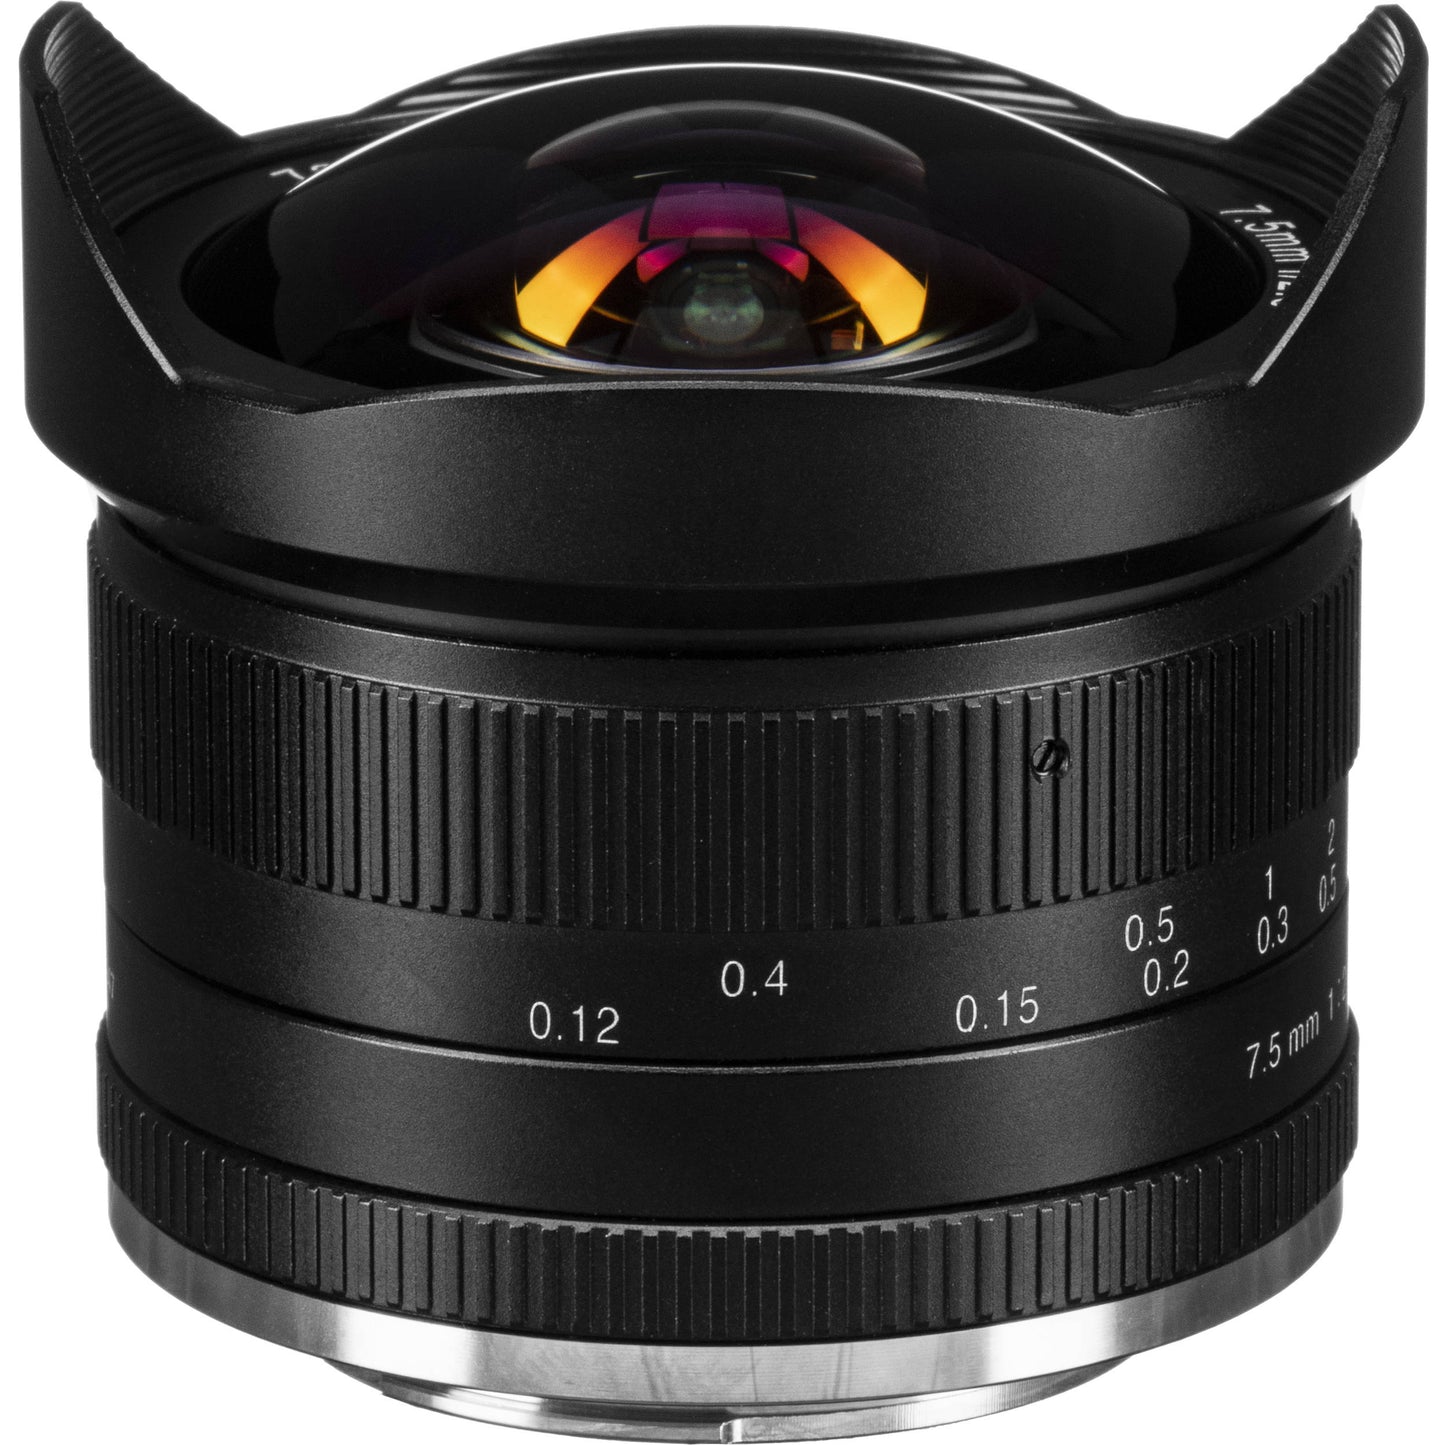 7Artisans 7.5mm f2.8 APS-C Manual Fisheye Prime Lens for Fujifilm X Mount Mirrorless Cameras with Protective Lens Cap Removable Lens Hood